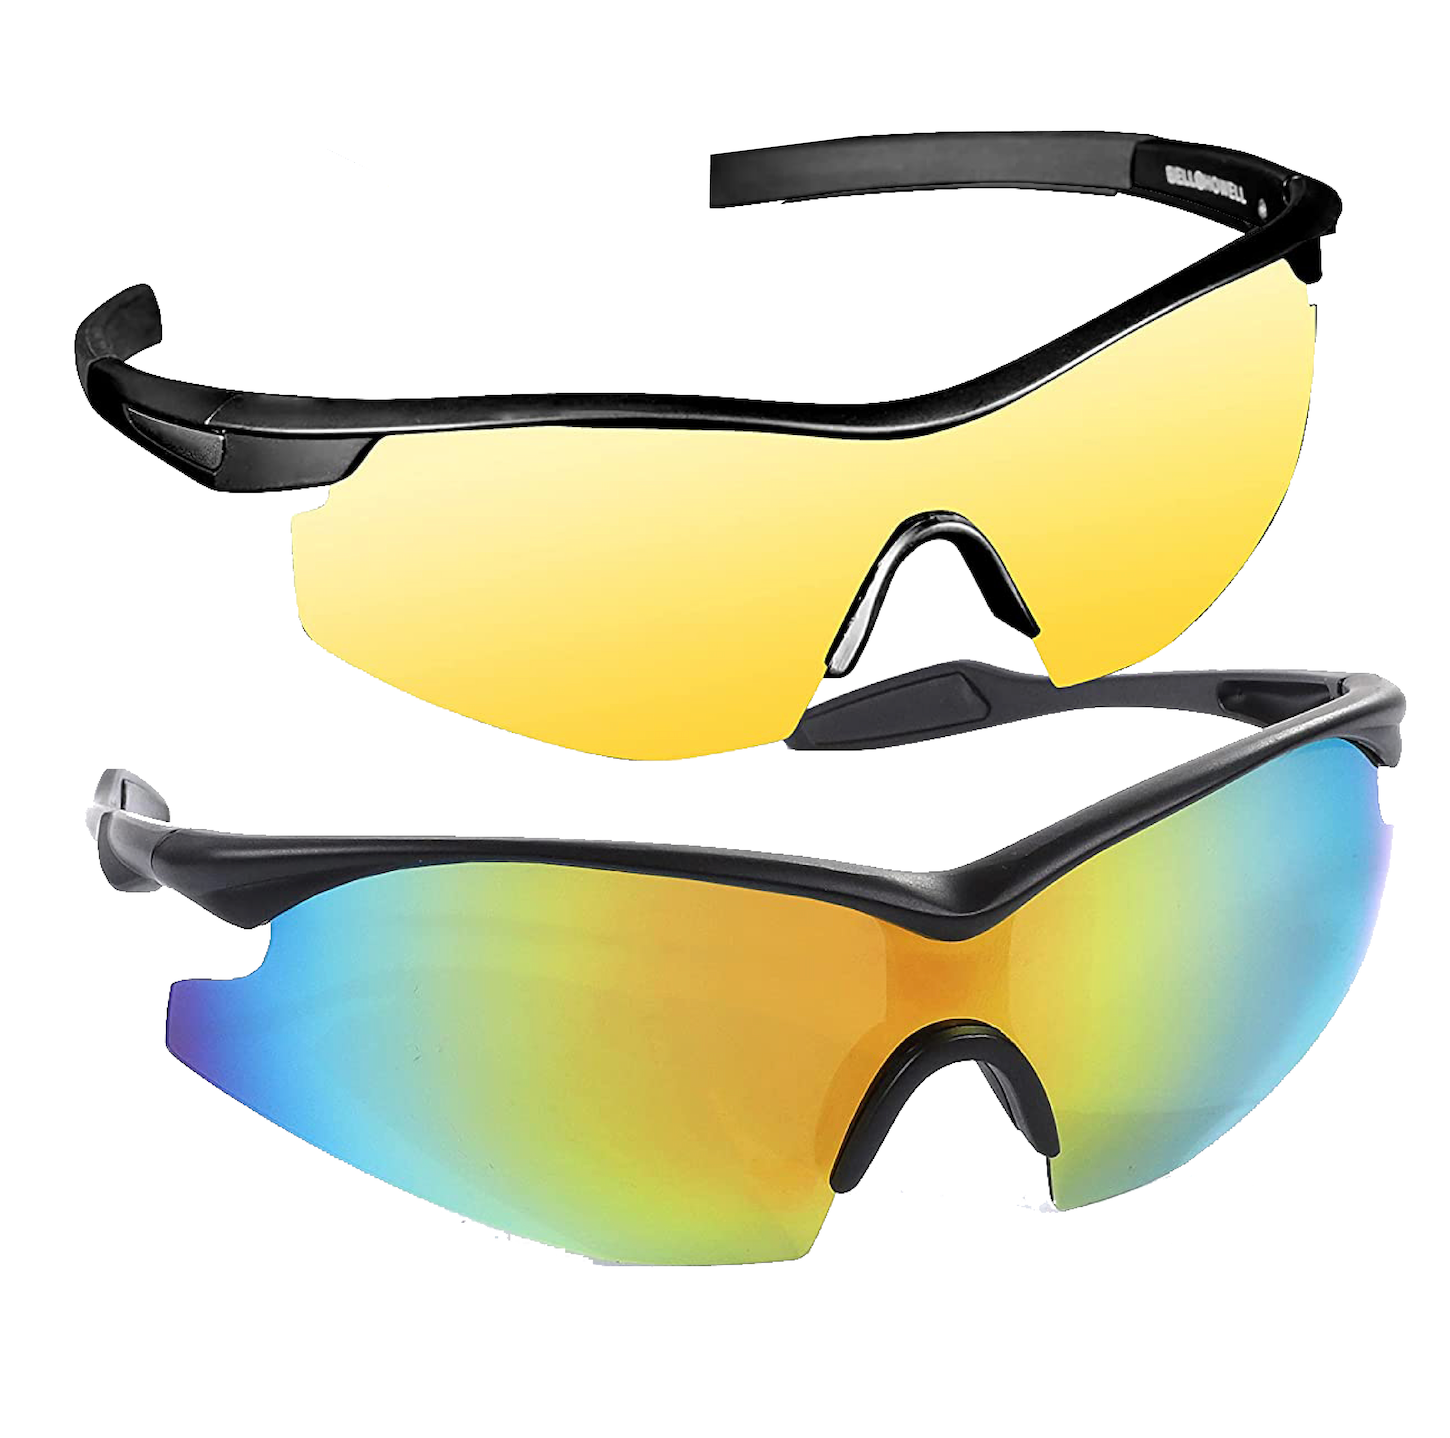 TacGlasses Day/Night Double Pack - Combo Set